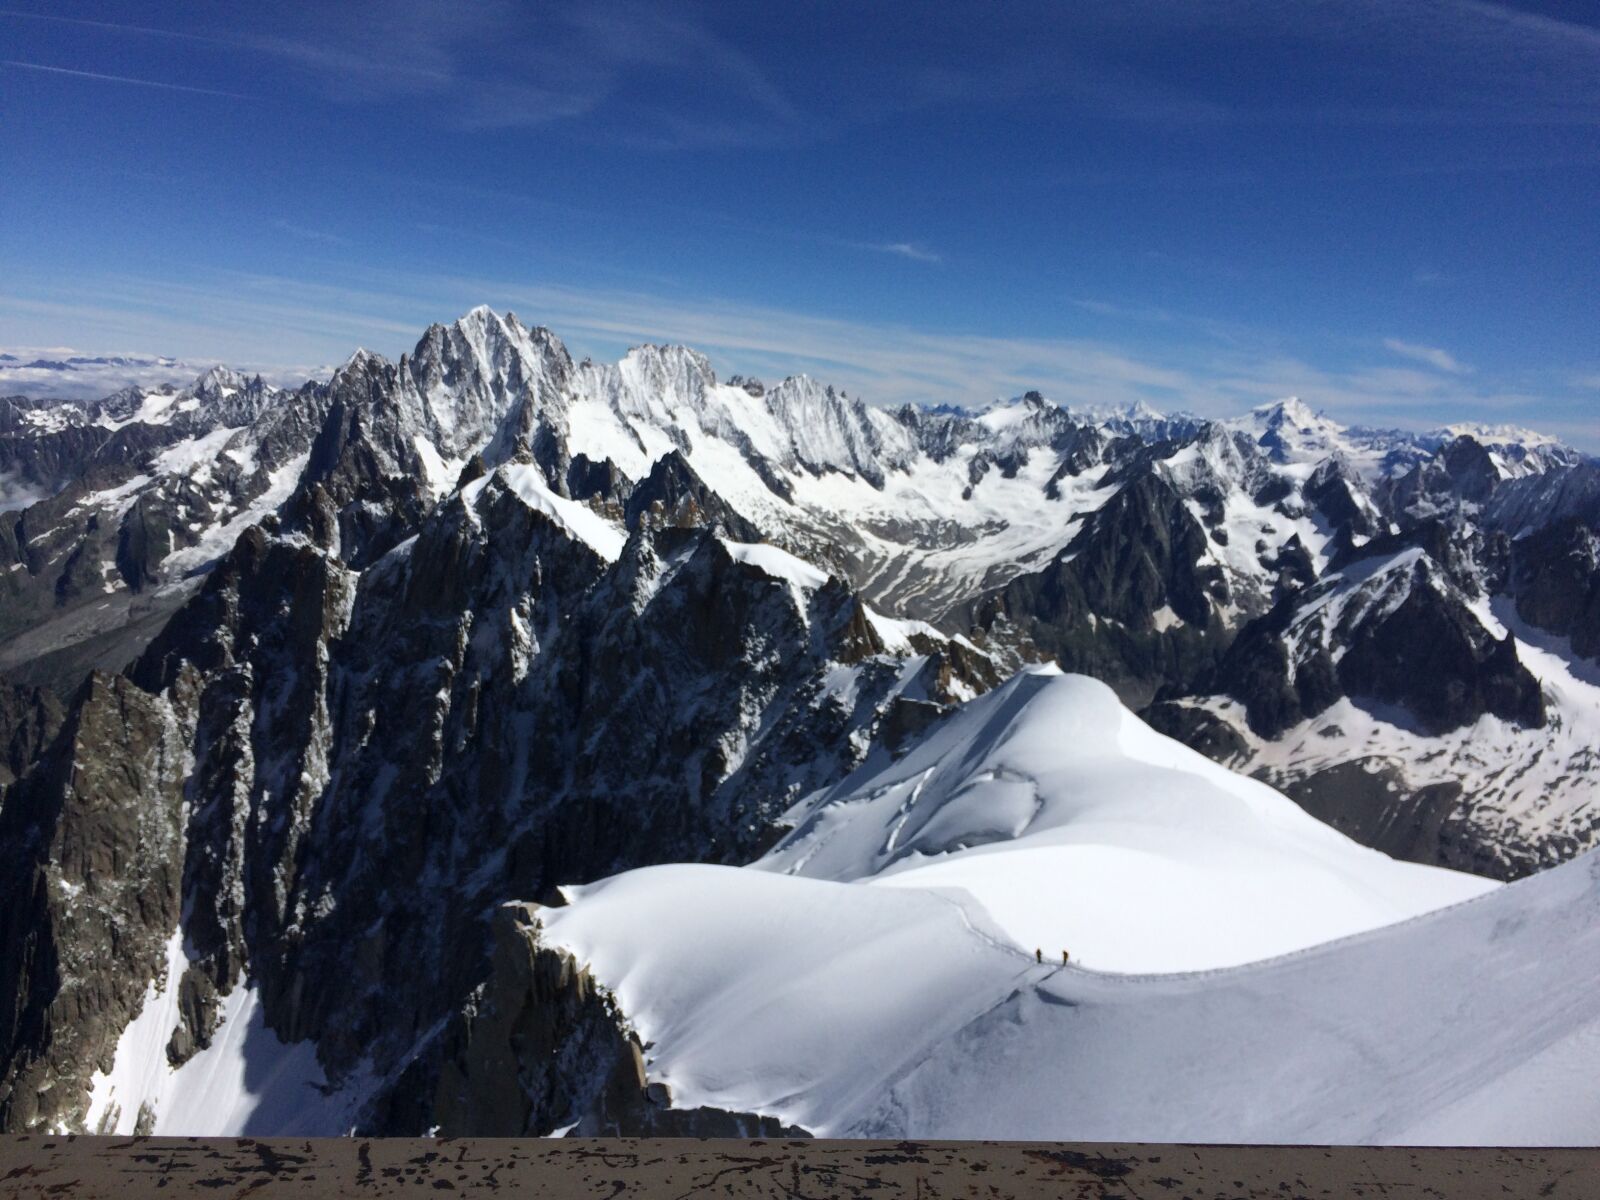 Apple iPhone 5s sample photo. Mont blanc, snow, mountains photography